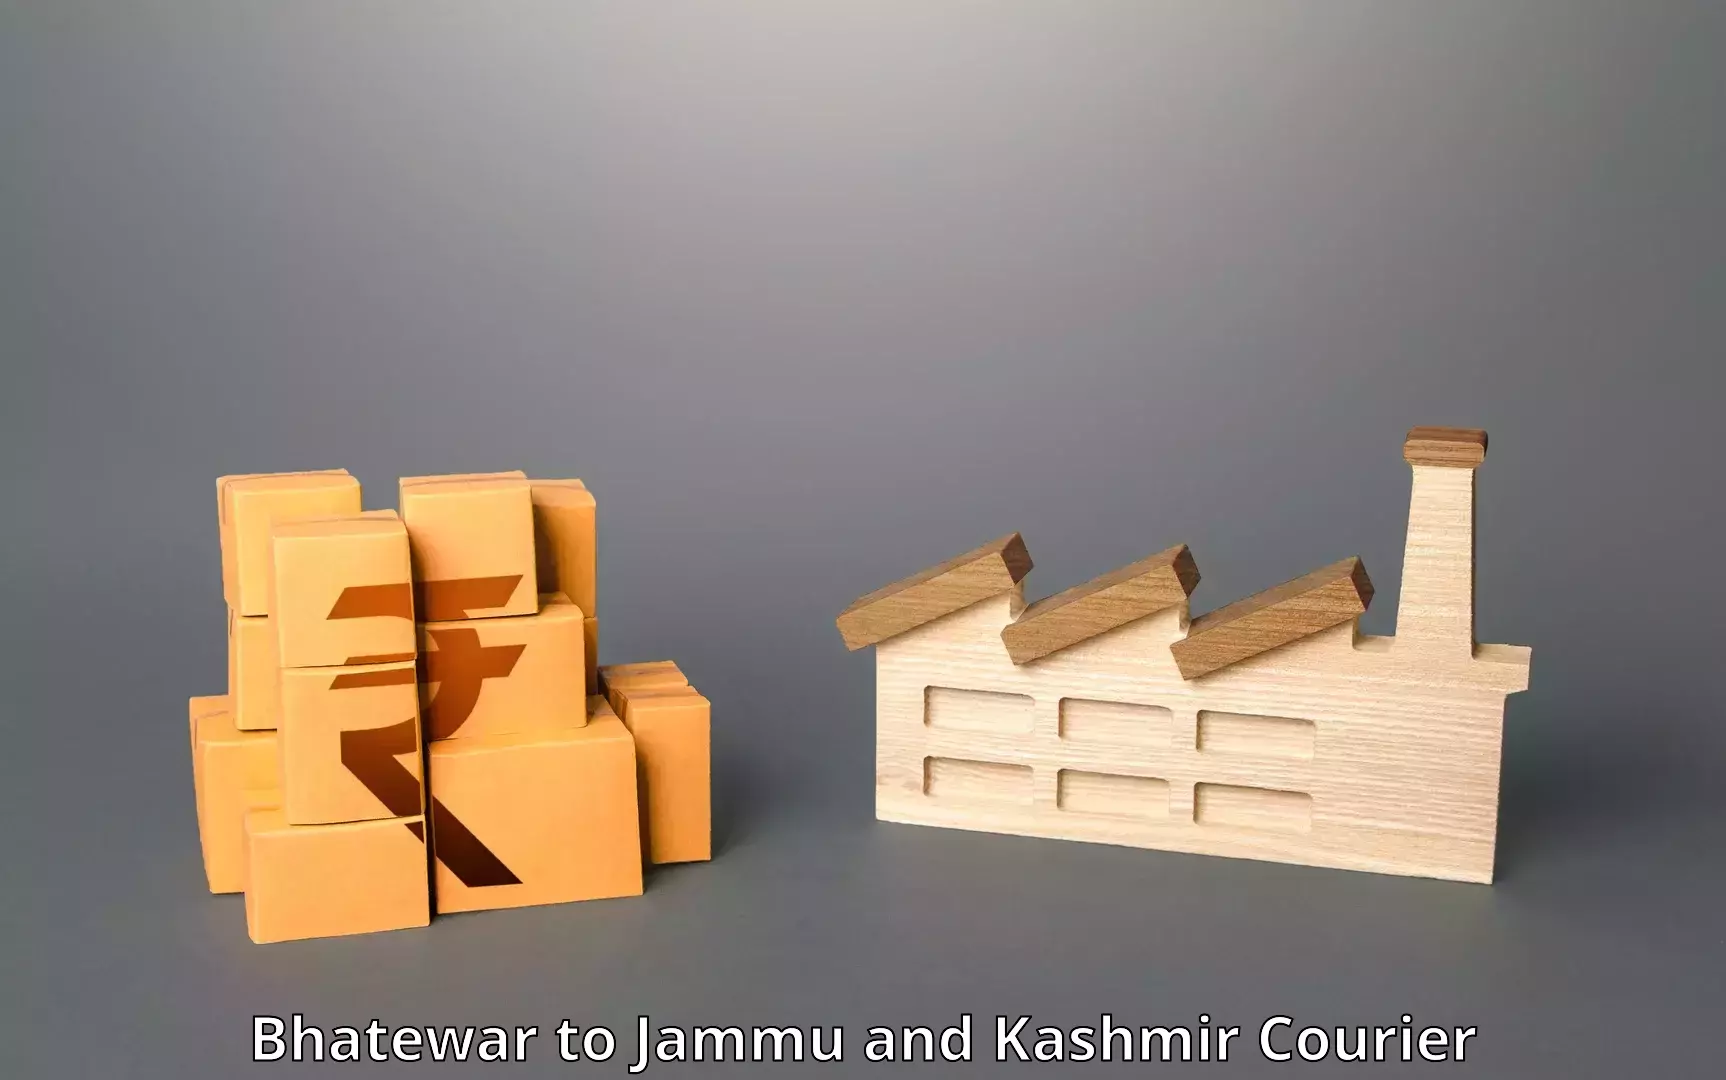 Multi-national courier services Bhatewar to Jammu and Kashmir